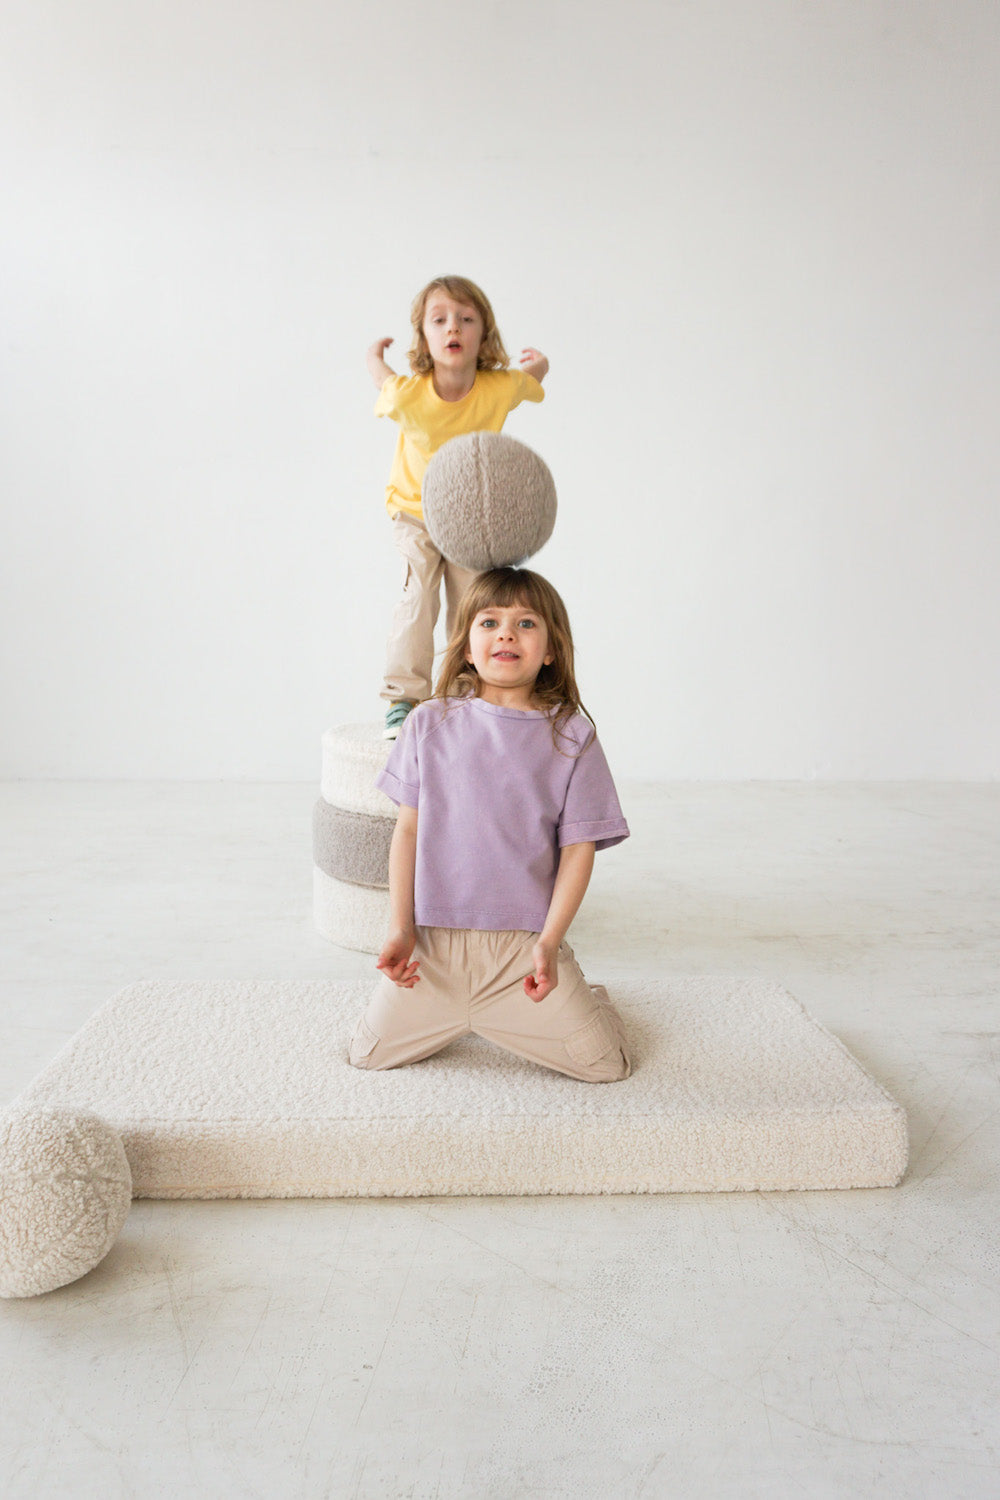 boy and girl playing boucle ball by bettys home on boucle mattress